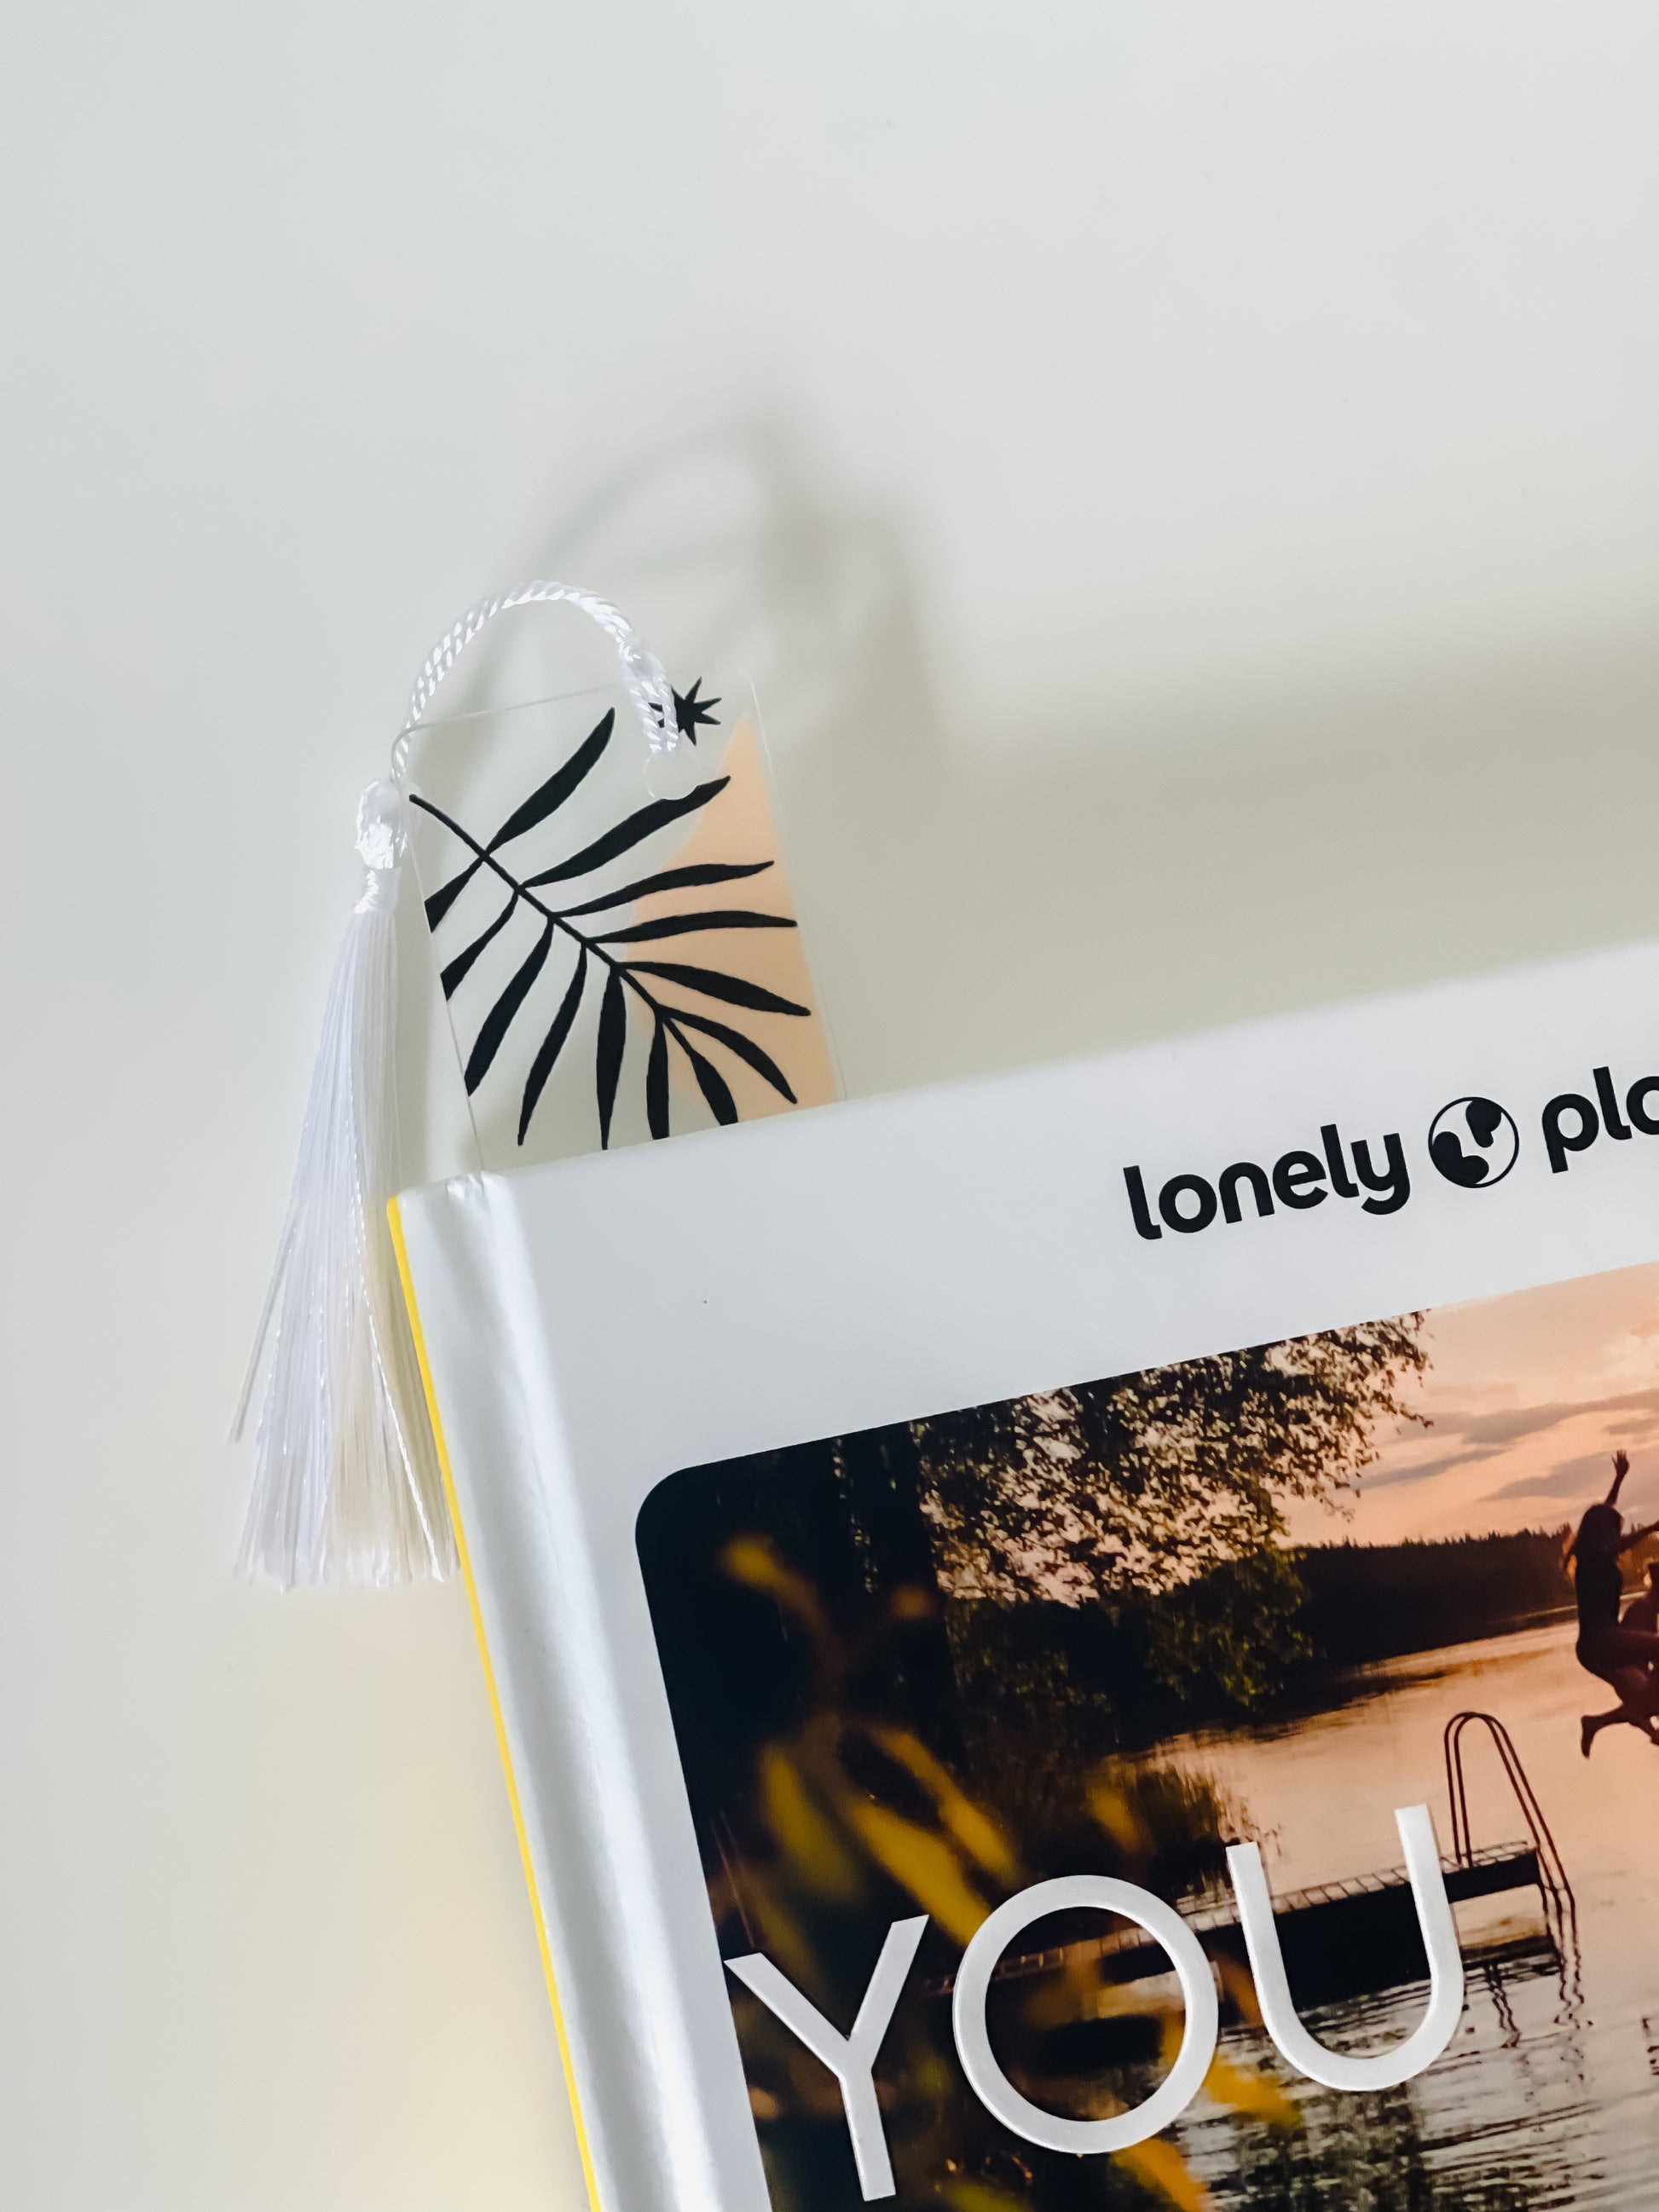 Acrylic Bookmark with white tassel - Colourful groovy designs adds flair to your reading experience. 